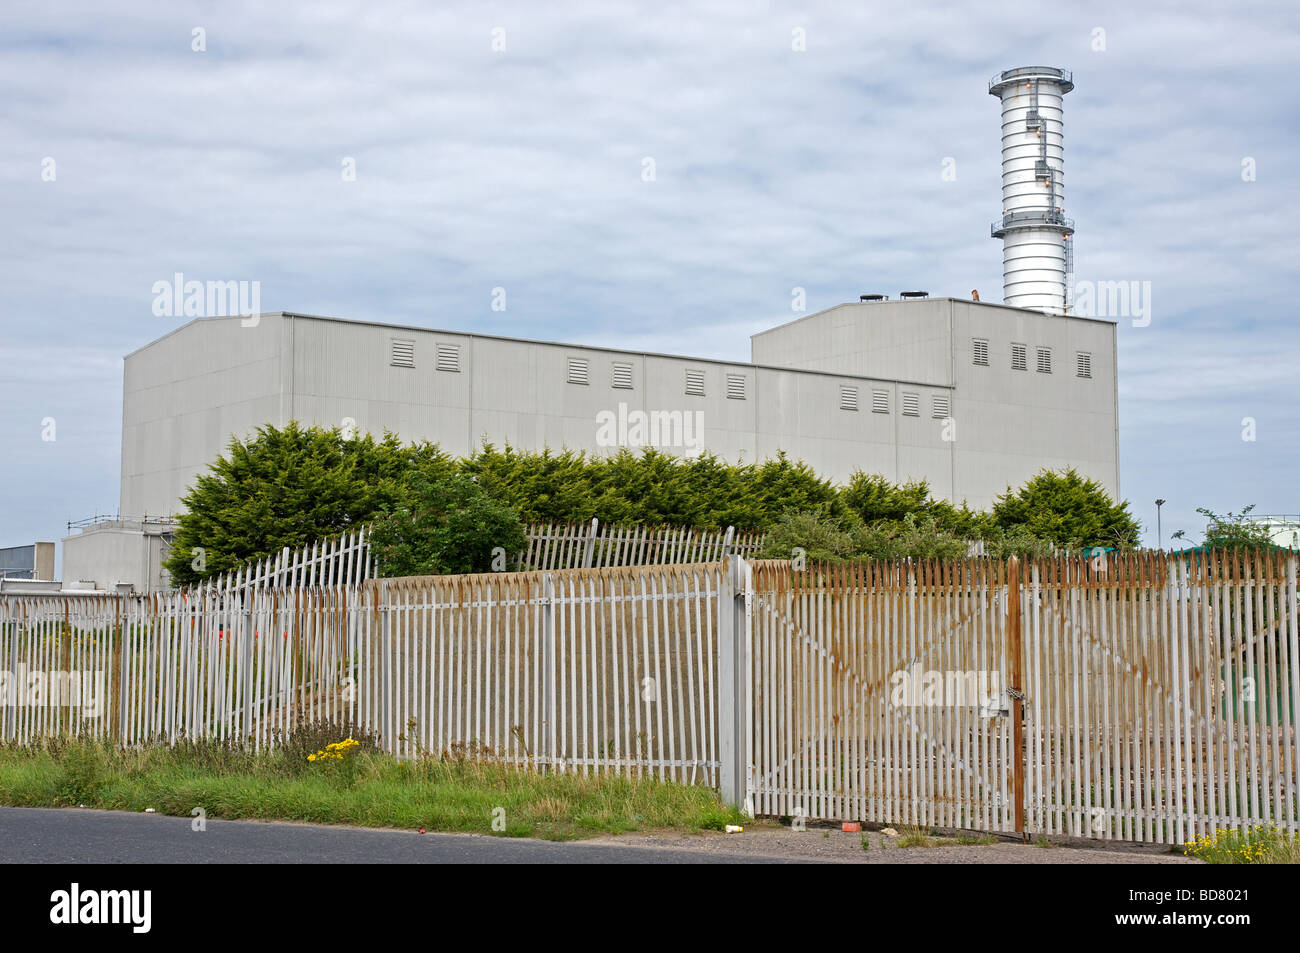 Gas-fired power station, Great Yarmouth, Norfolk, UK. Stock Photo